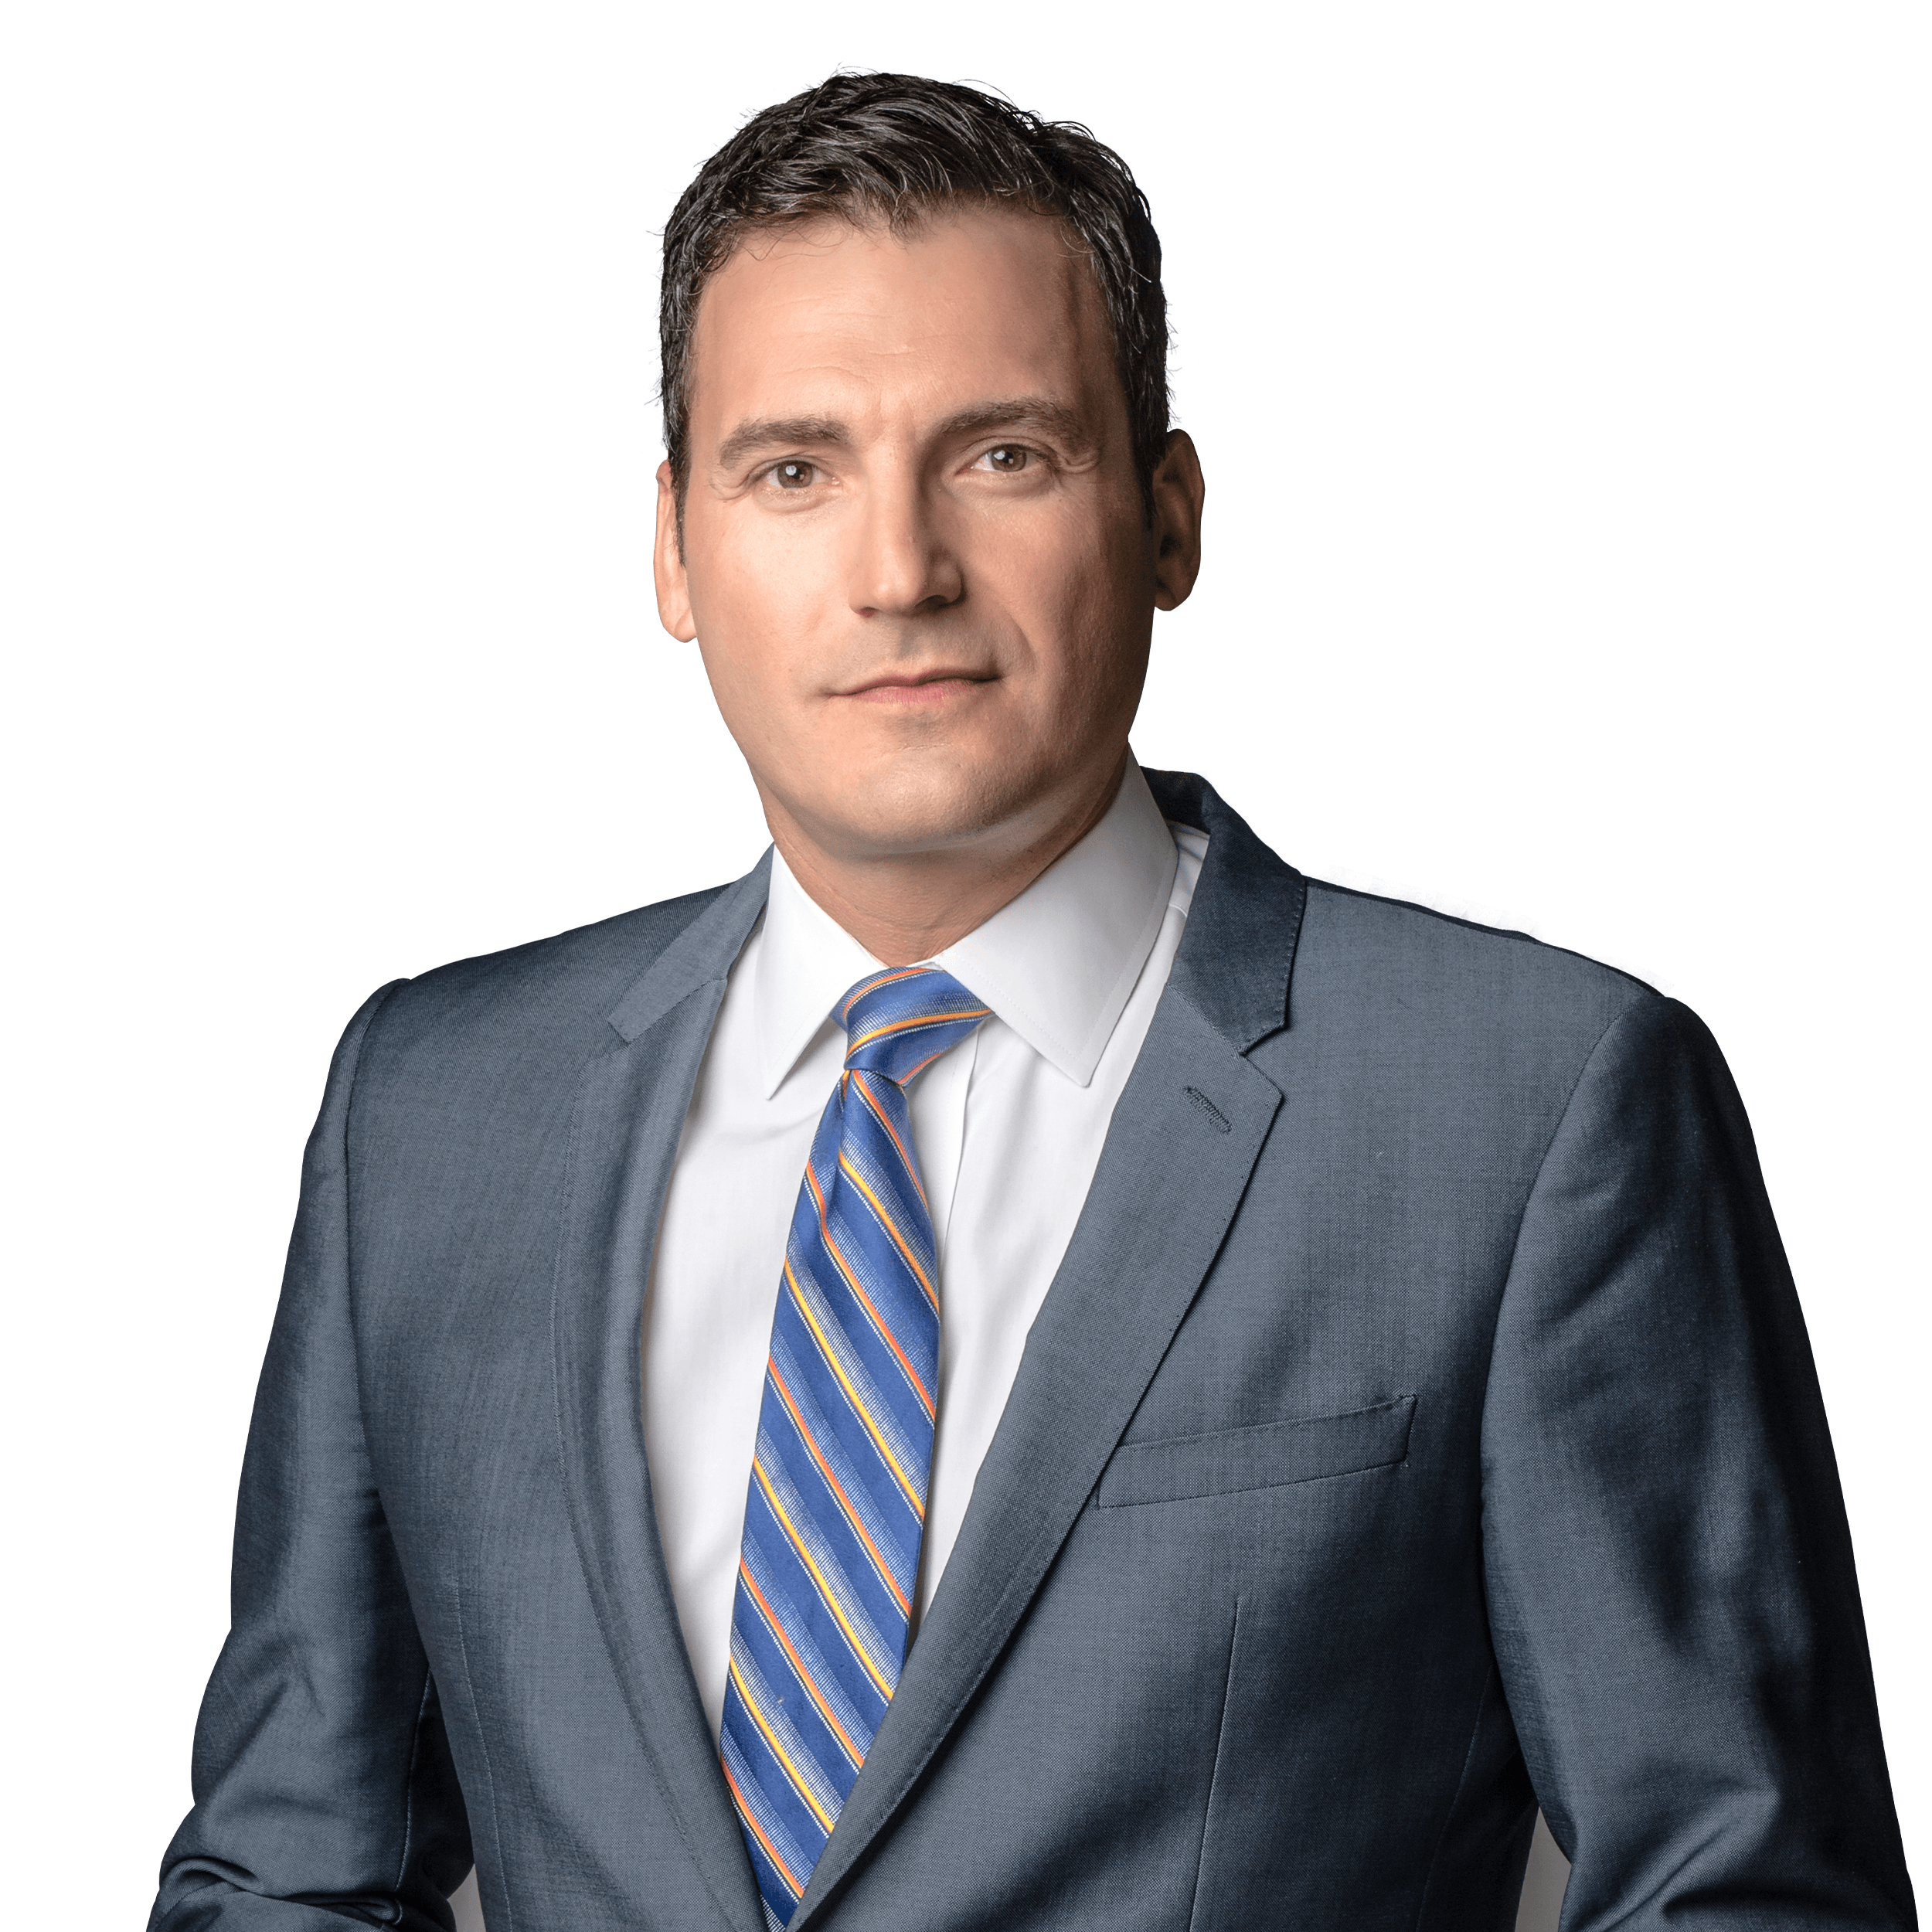 Hour 1 of The Evan Solomon Show for August 5th, 2020